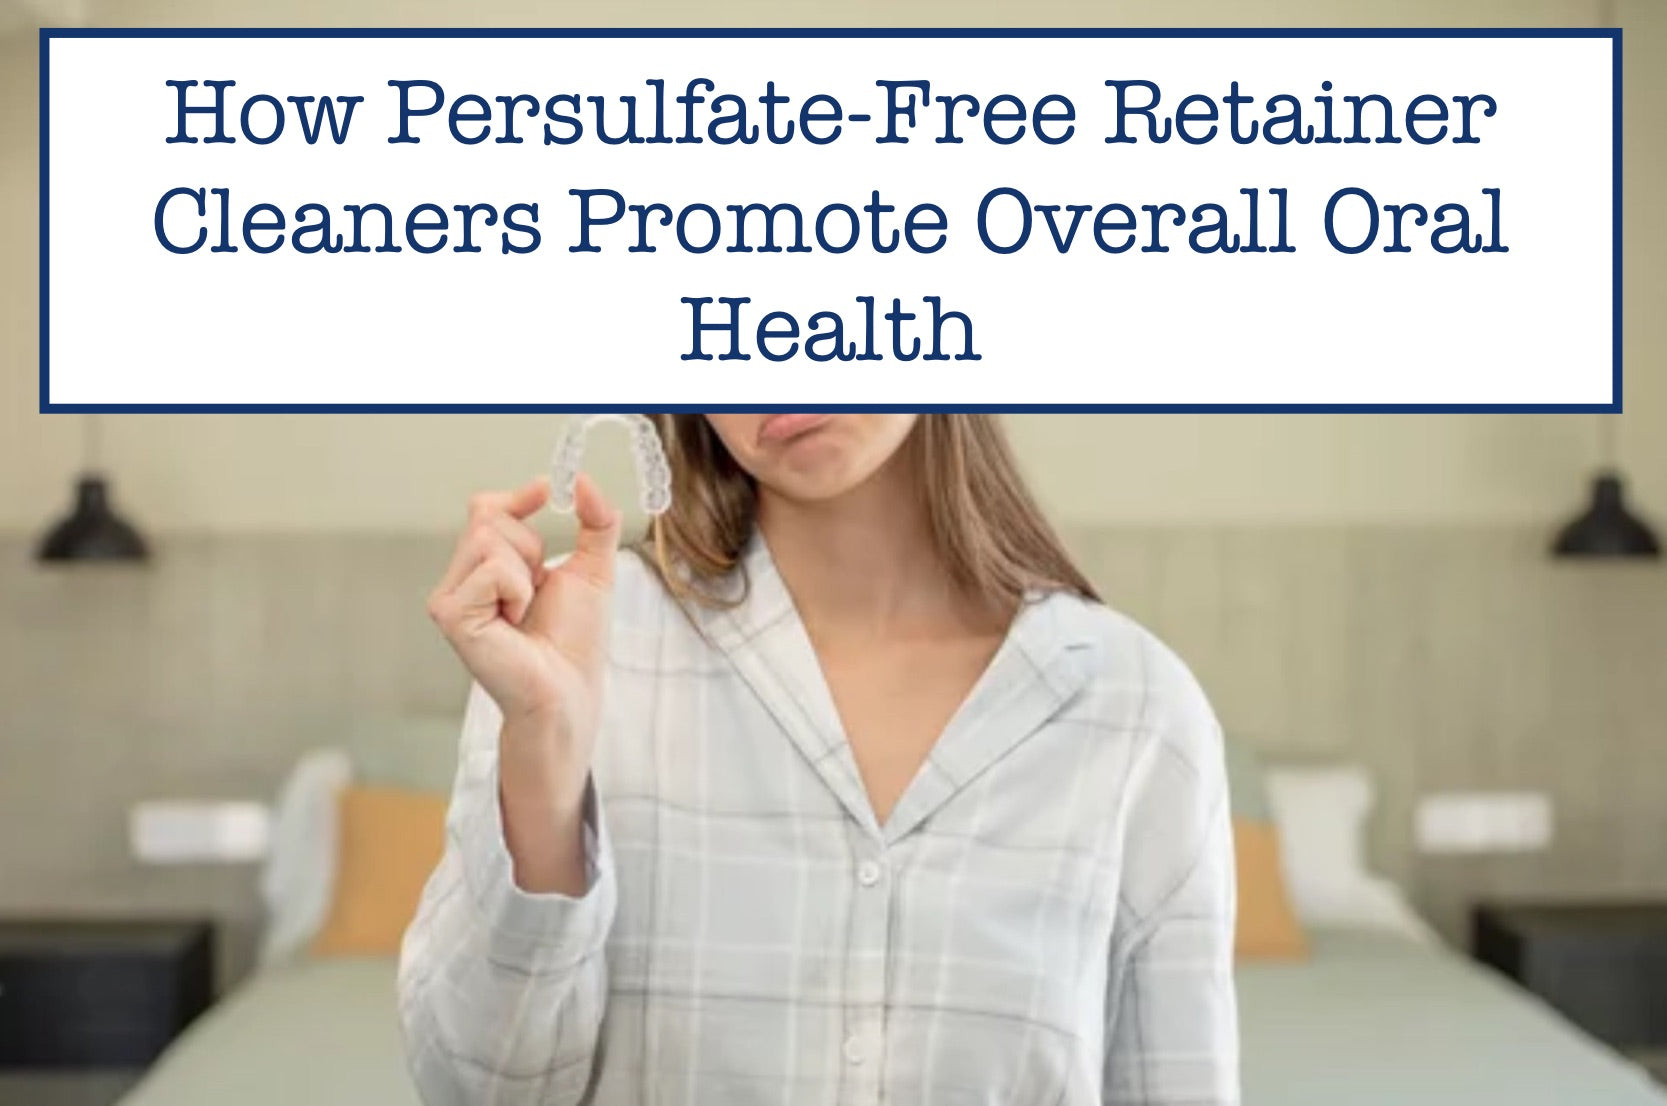 How Persulfate-Free Retainer Cleaners Promote Overall Oral Health